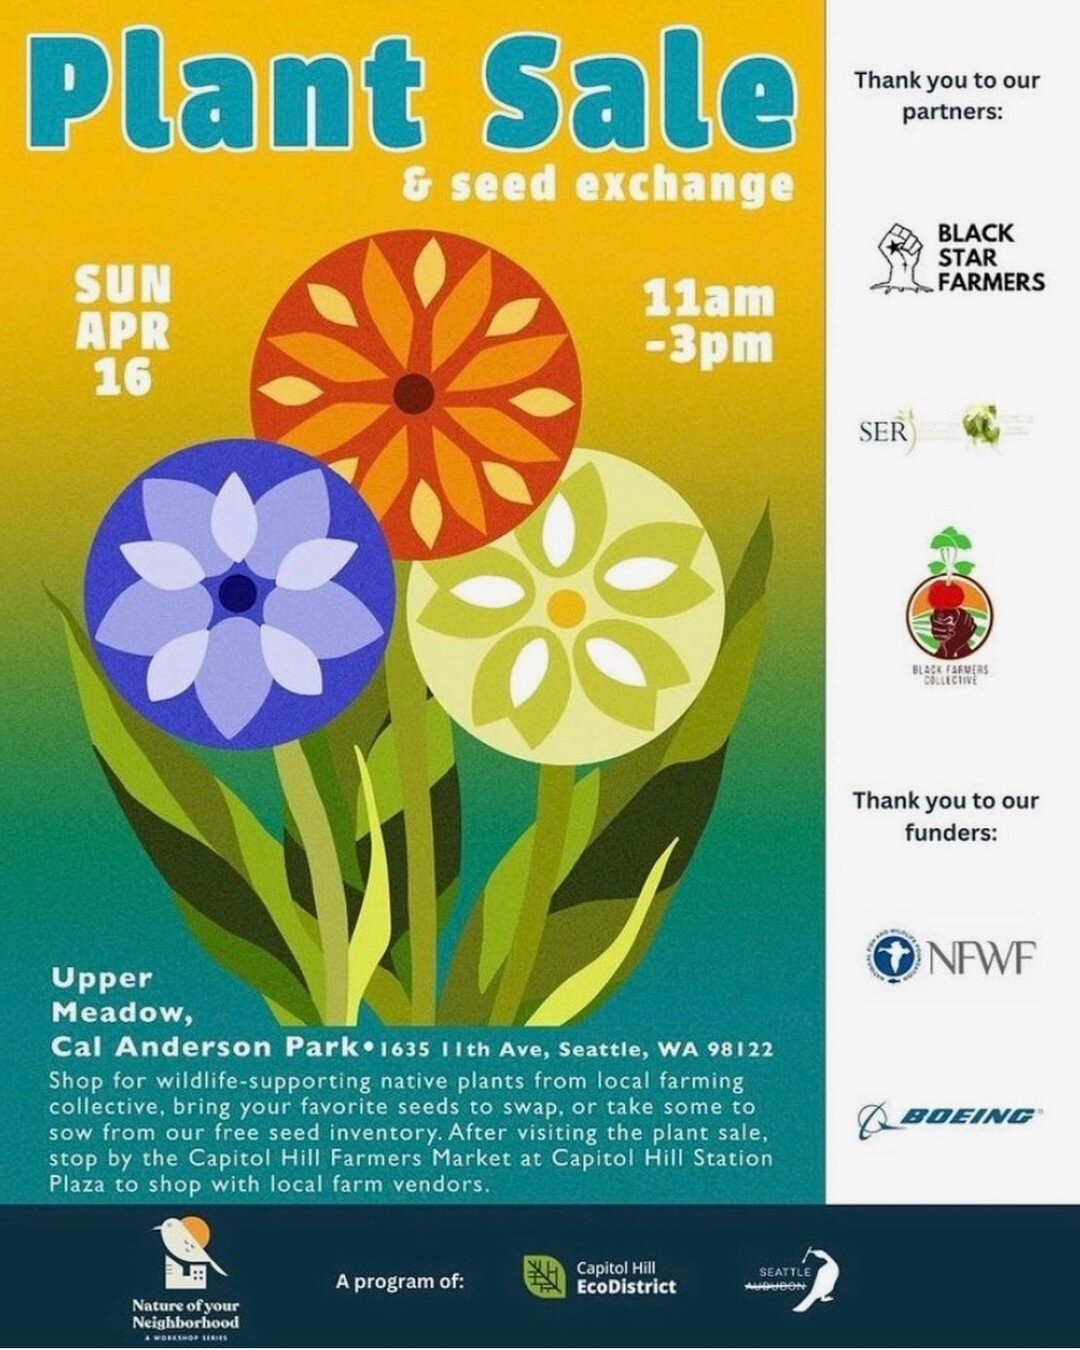 We will be present here on Sunday 4/16 from 11-3 at Cal Anderson Upper Meadow. We will be bringing native plants that we have been nursing for many months. We intend to offer these plants to community at the rate of only our labor and material costs.